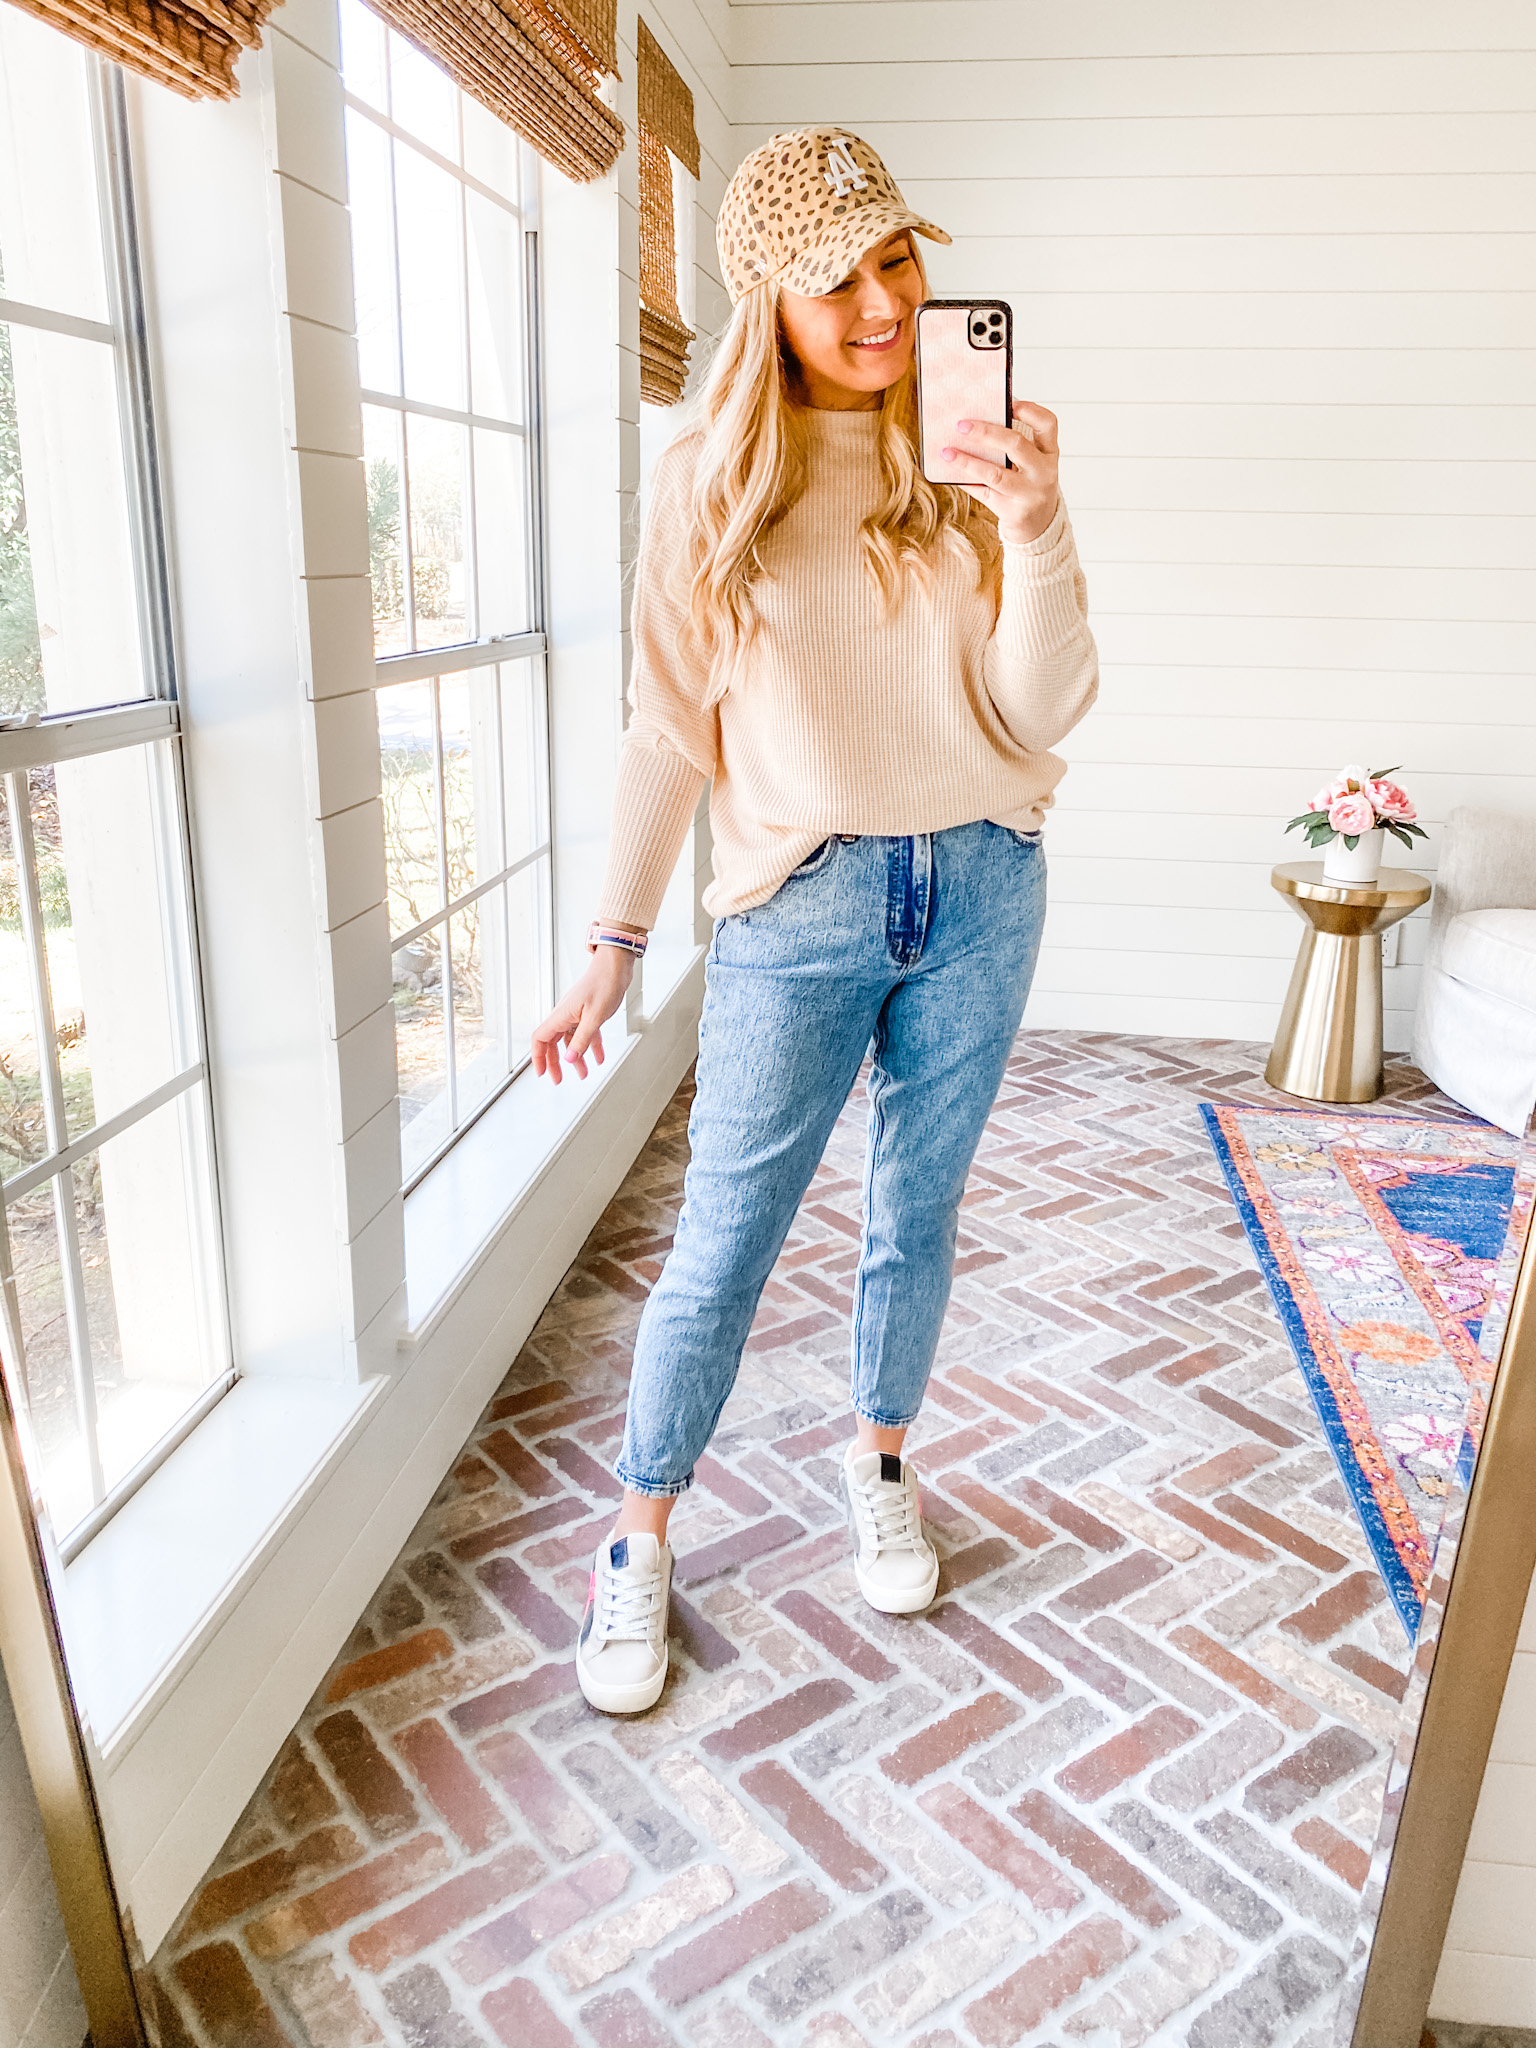 Fitting Room Finds by popular Houston fashion blog, Fancy Ashley: image of a woman wearing a Gibson tan sweater, jeans, white sneakers, and leopard print LA baseball cap.